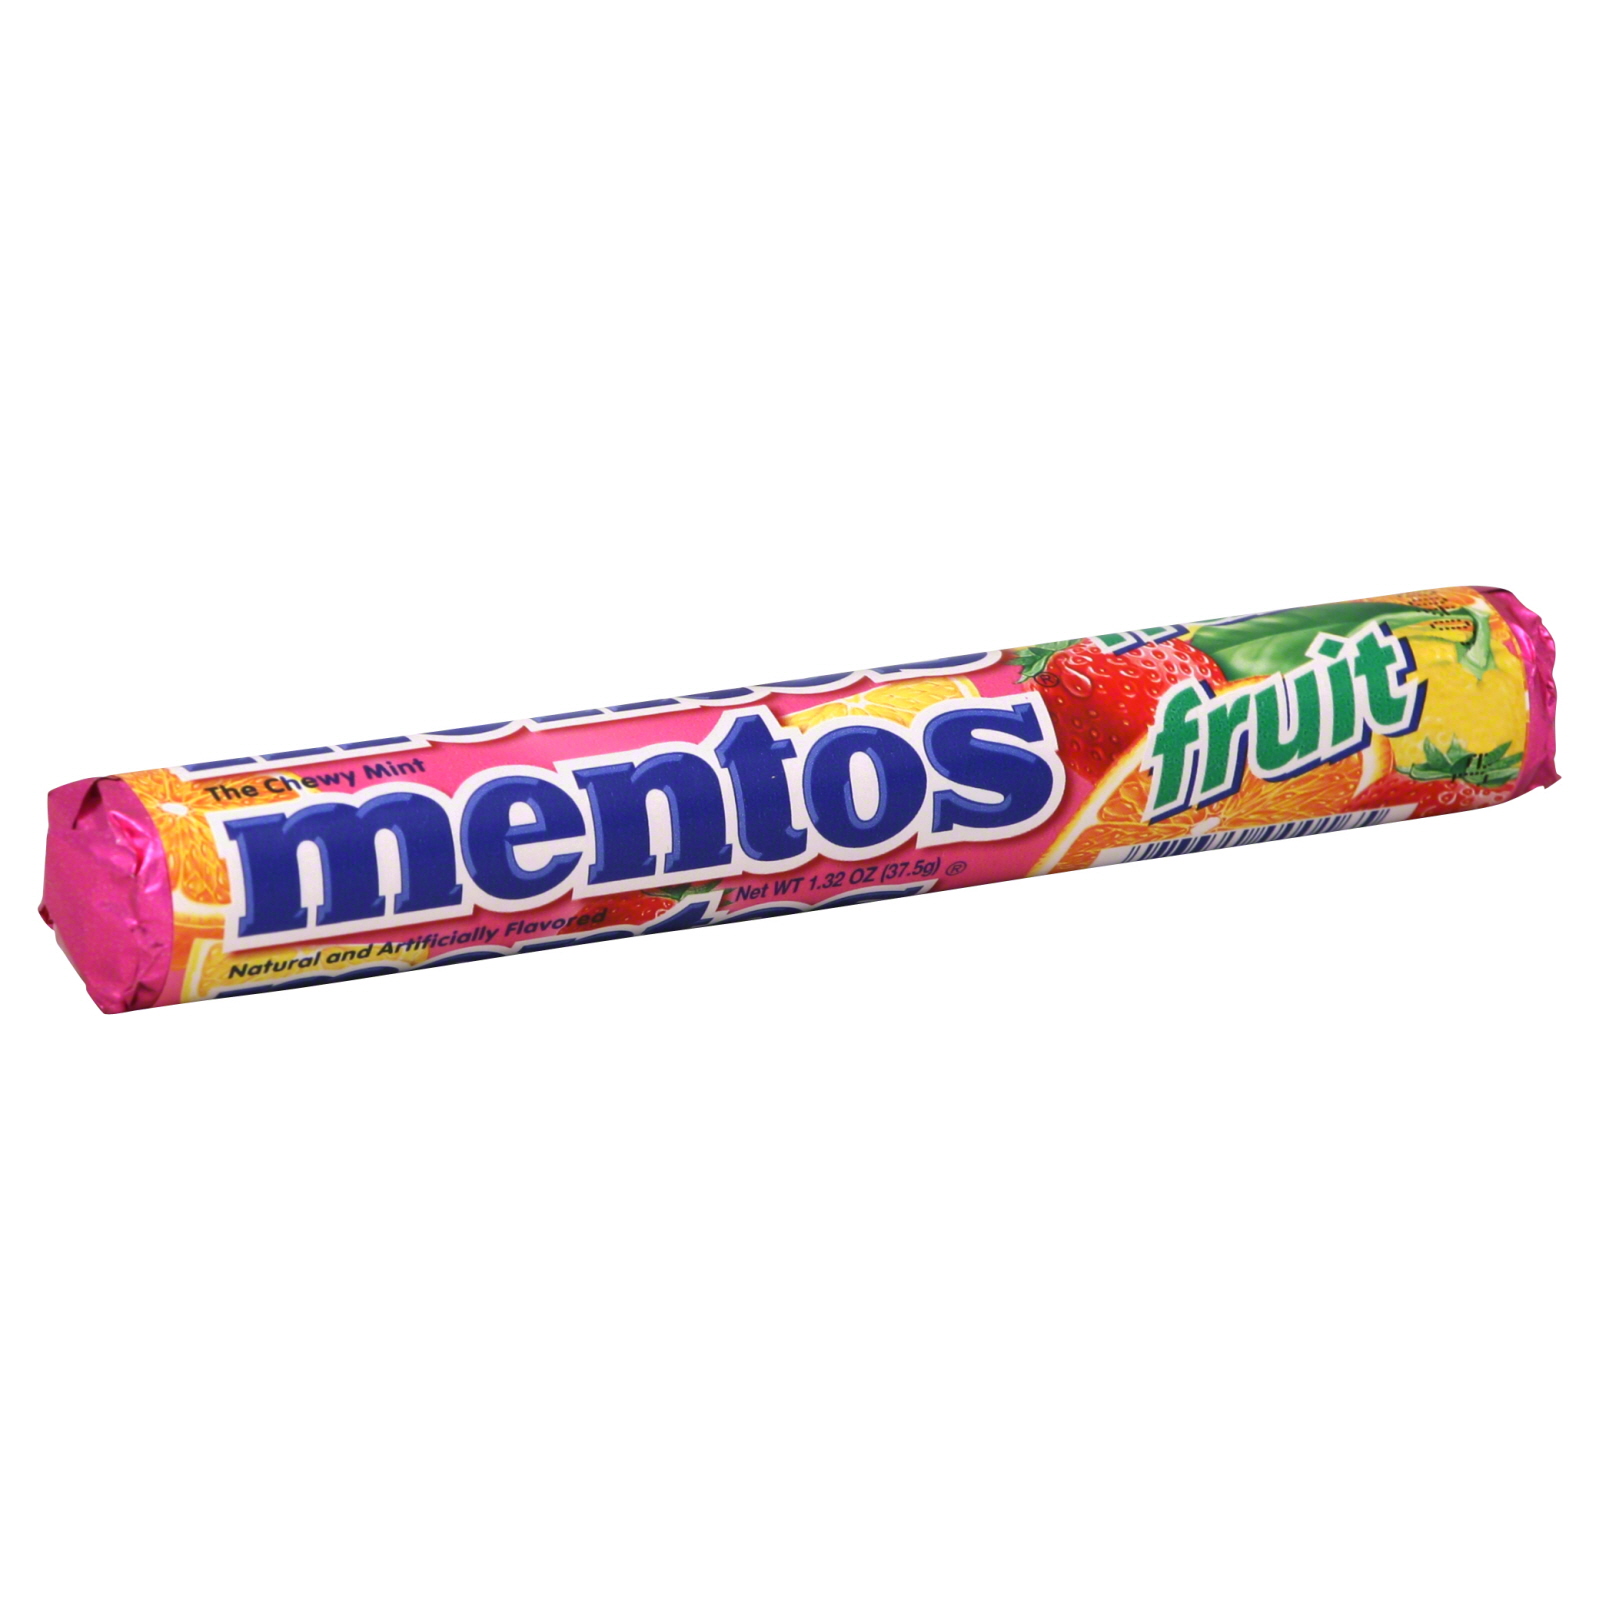 Mentos The Chewy Mint, Fruit, 1.32 oz (37.5 g)